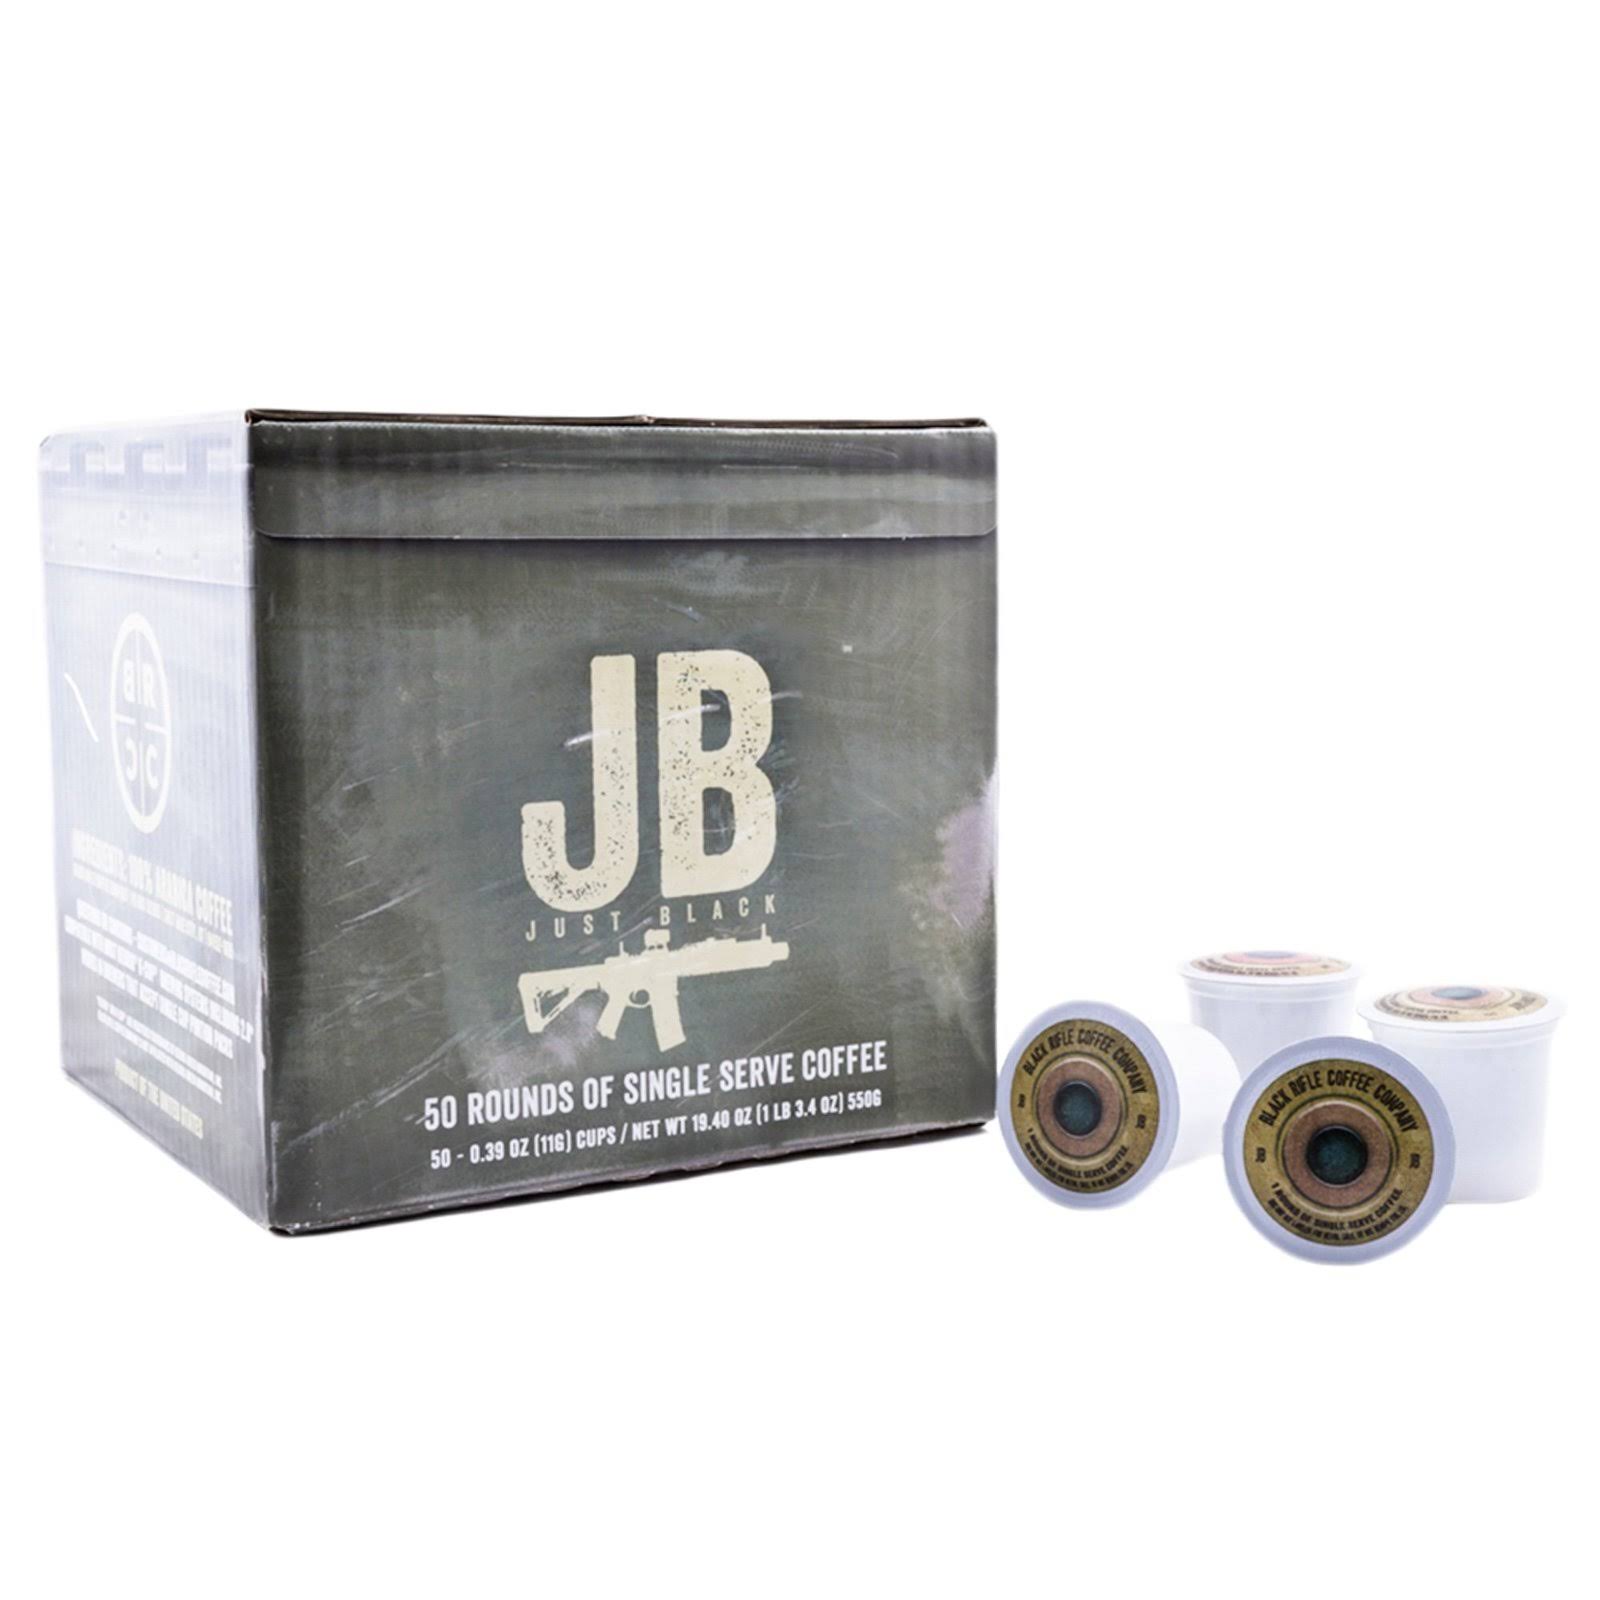 Black Rifle Coffee - Just Black Coffee Rounds (50 Count)